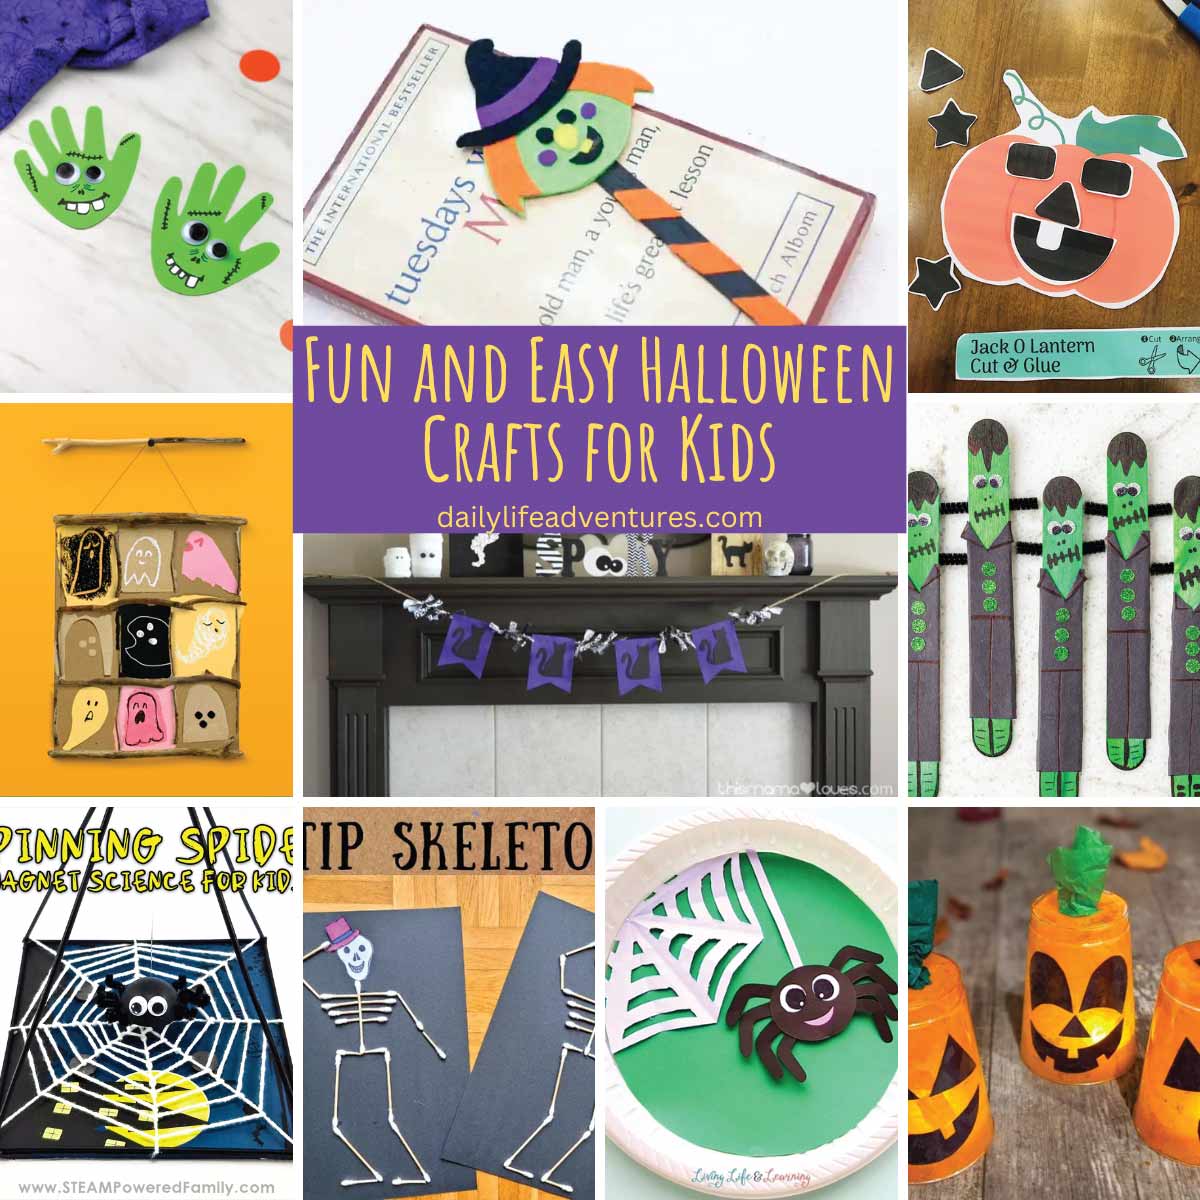 10 Fun and Easy Halloween Crafts for Young Kids